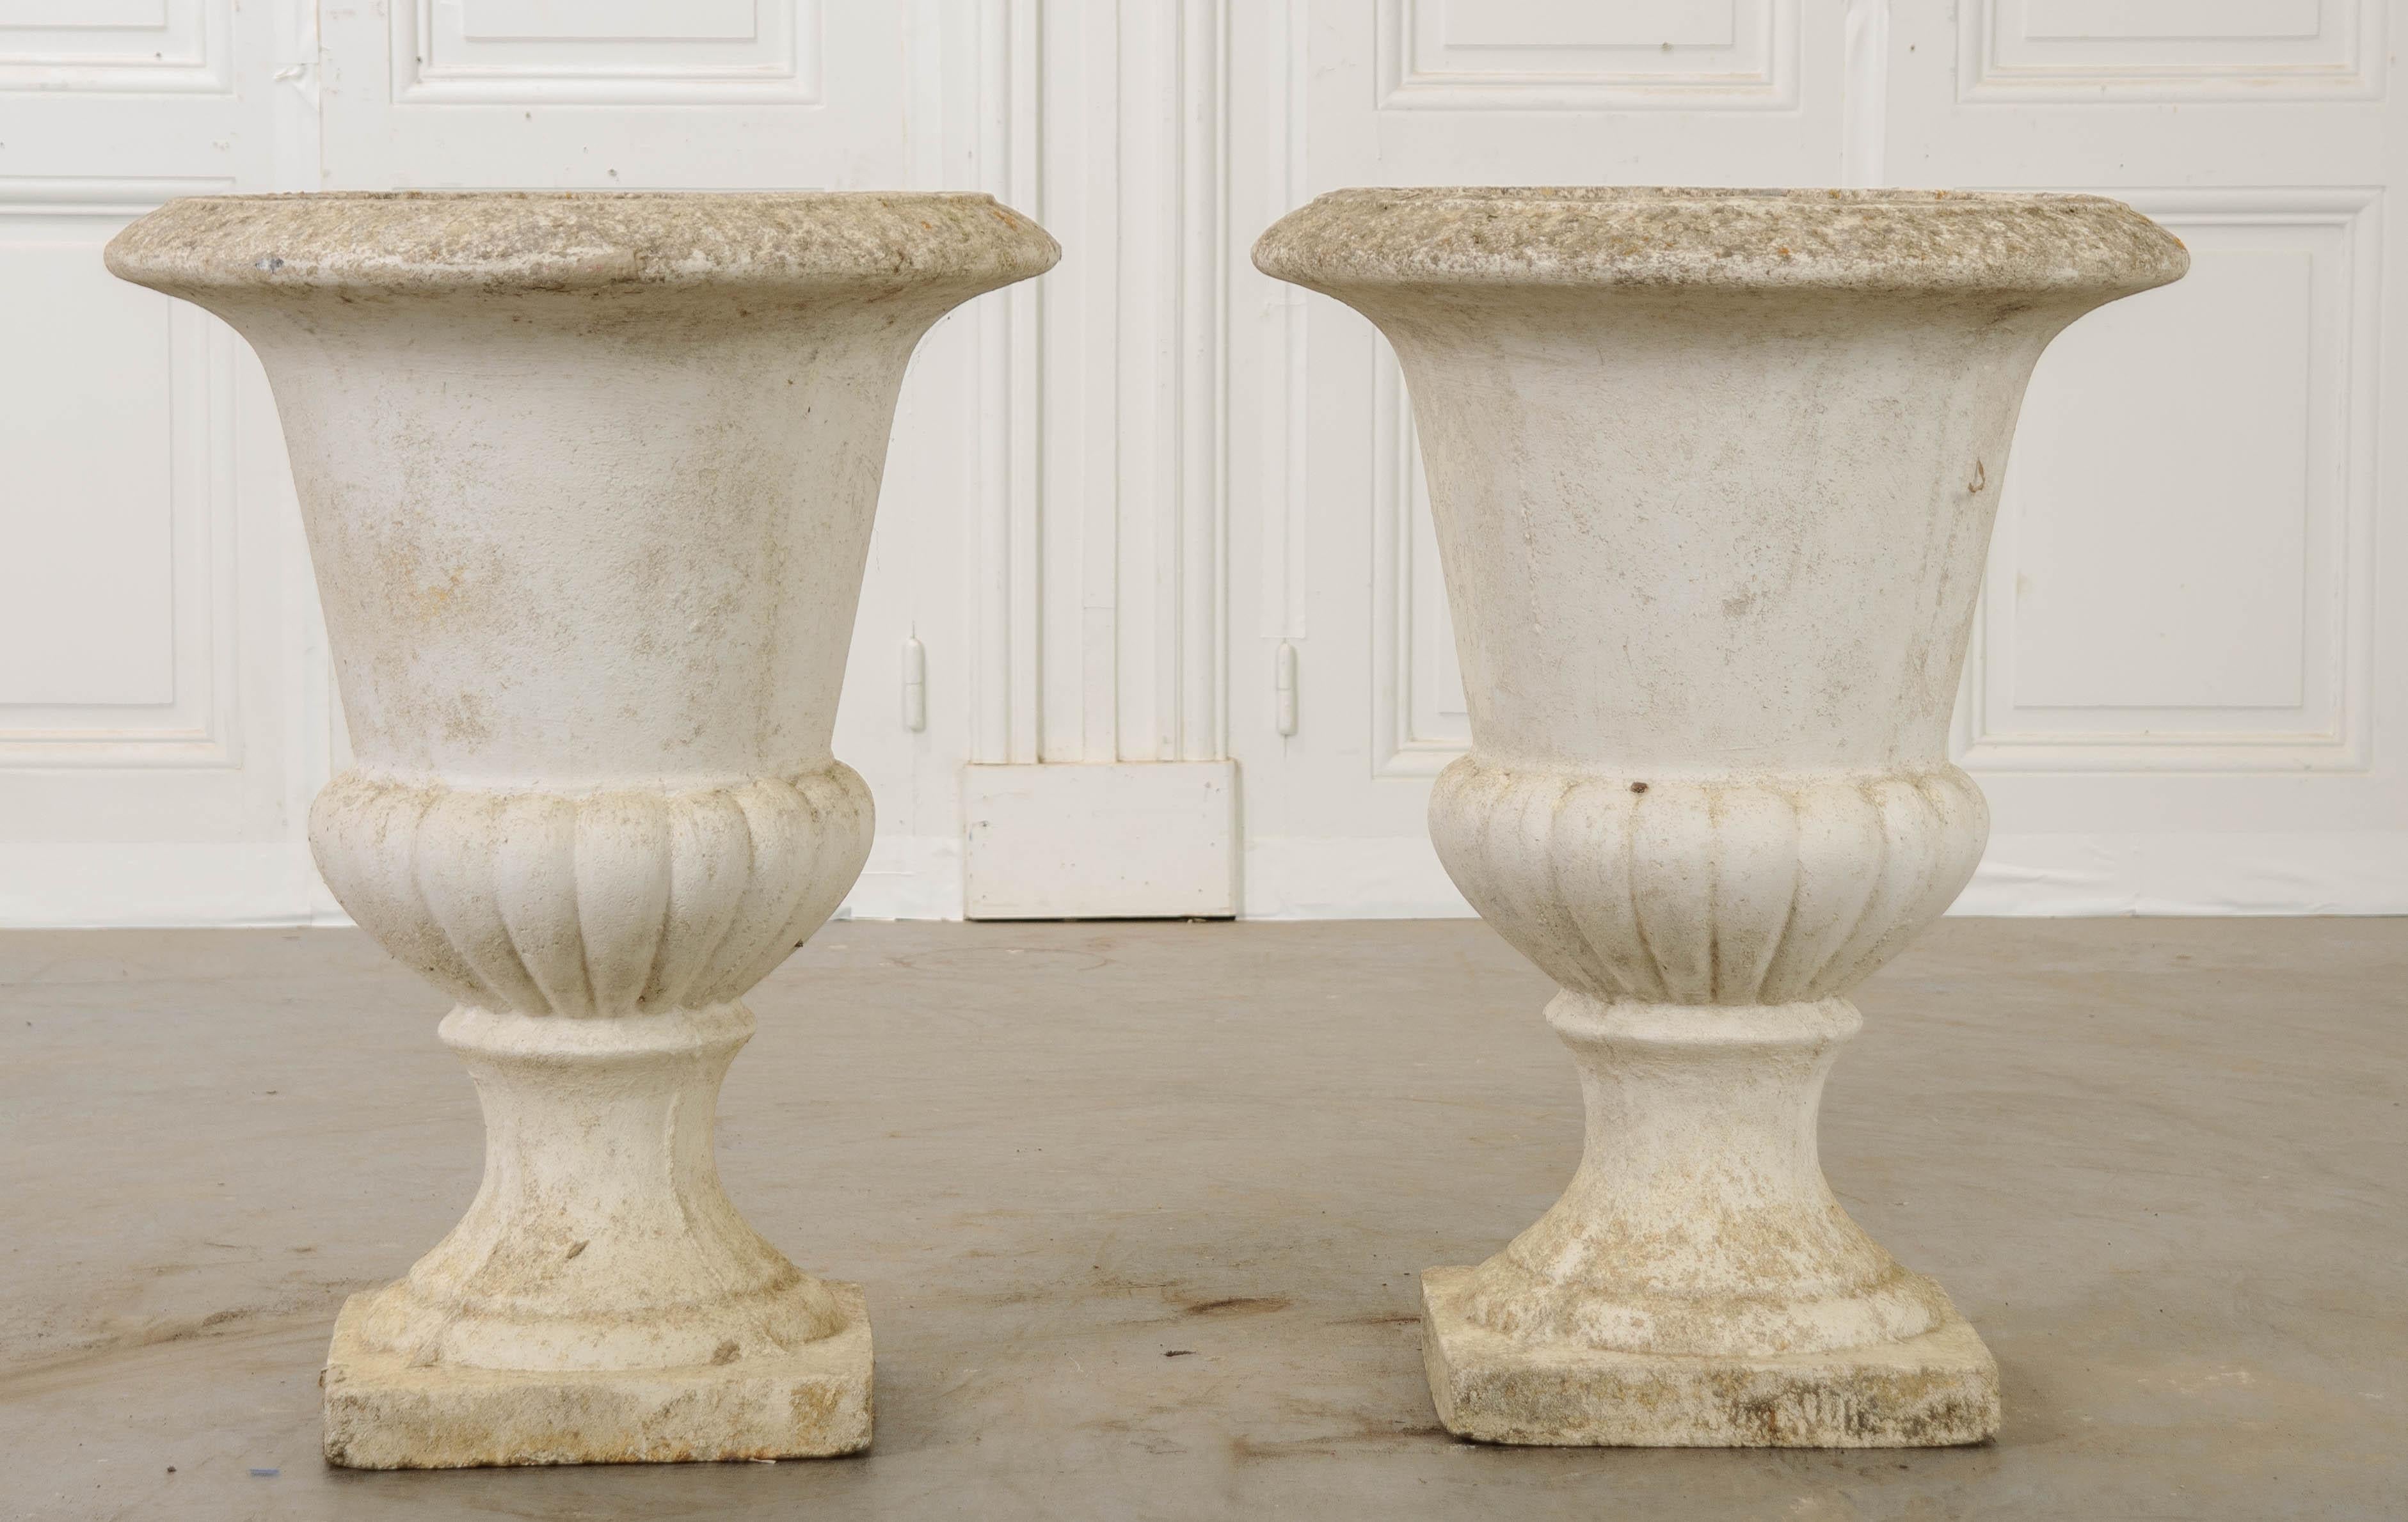 A handsome pair of urn-form planters, made of cast stone and painted white. Dating to 1900s France, the pair have an aged appearance that is not only incredible, but genuine. The planters’ lips have been styled with an egg and dart motif that has